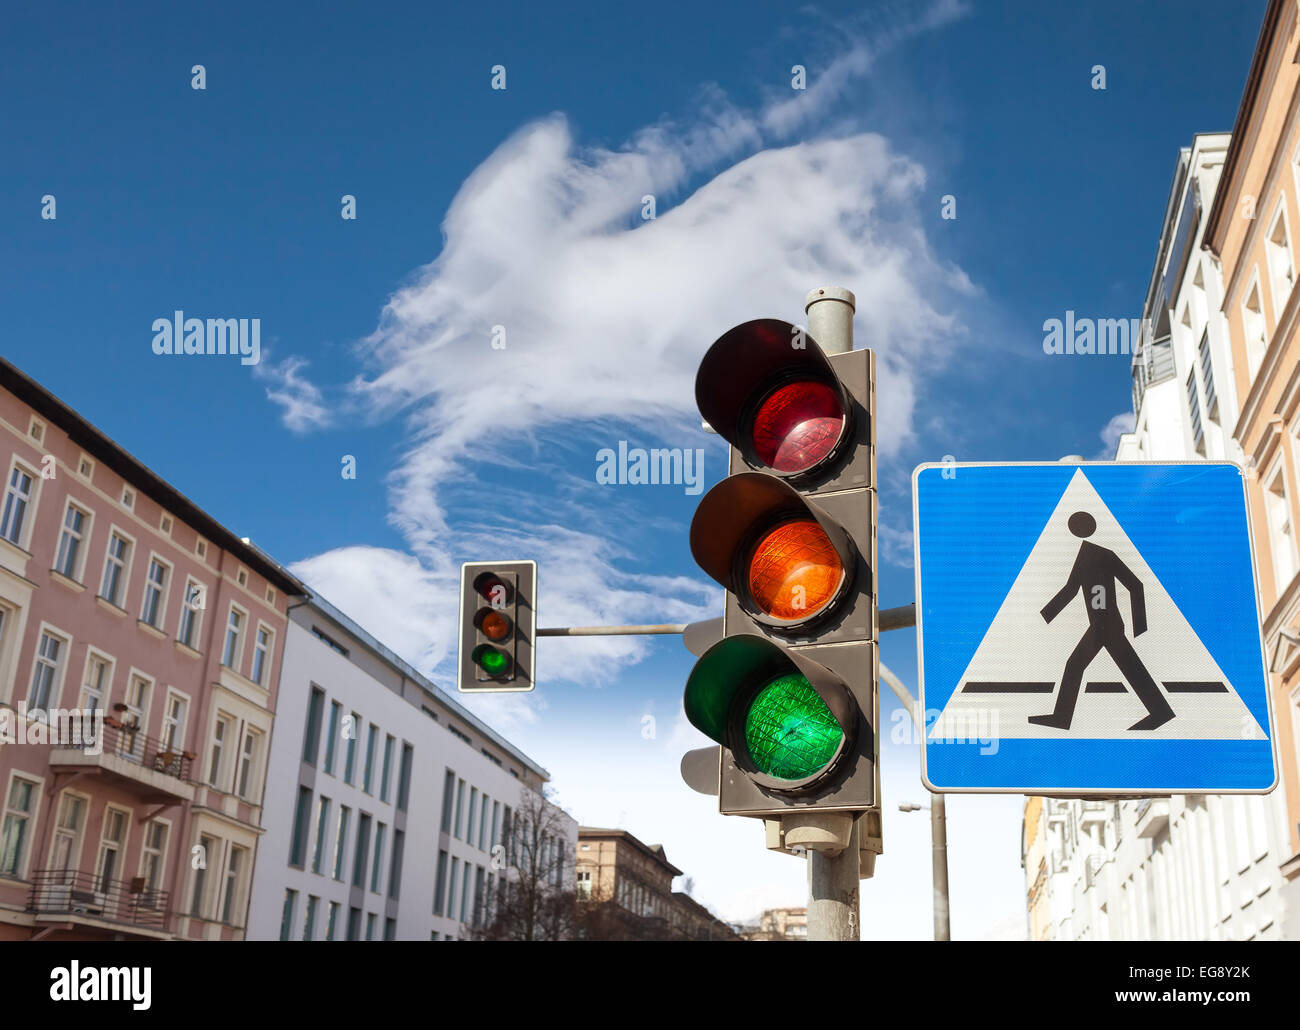 Traffic lights and pedestrian crossing sign in a city. Stock Photo